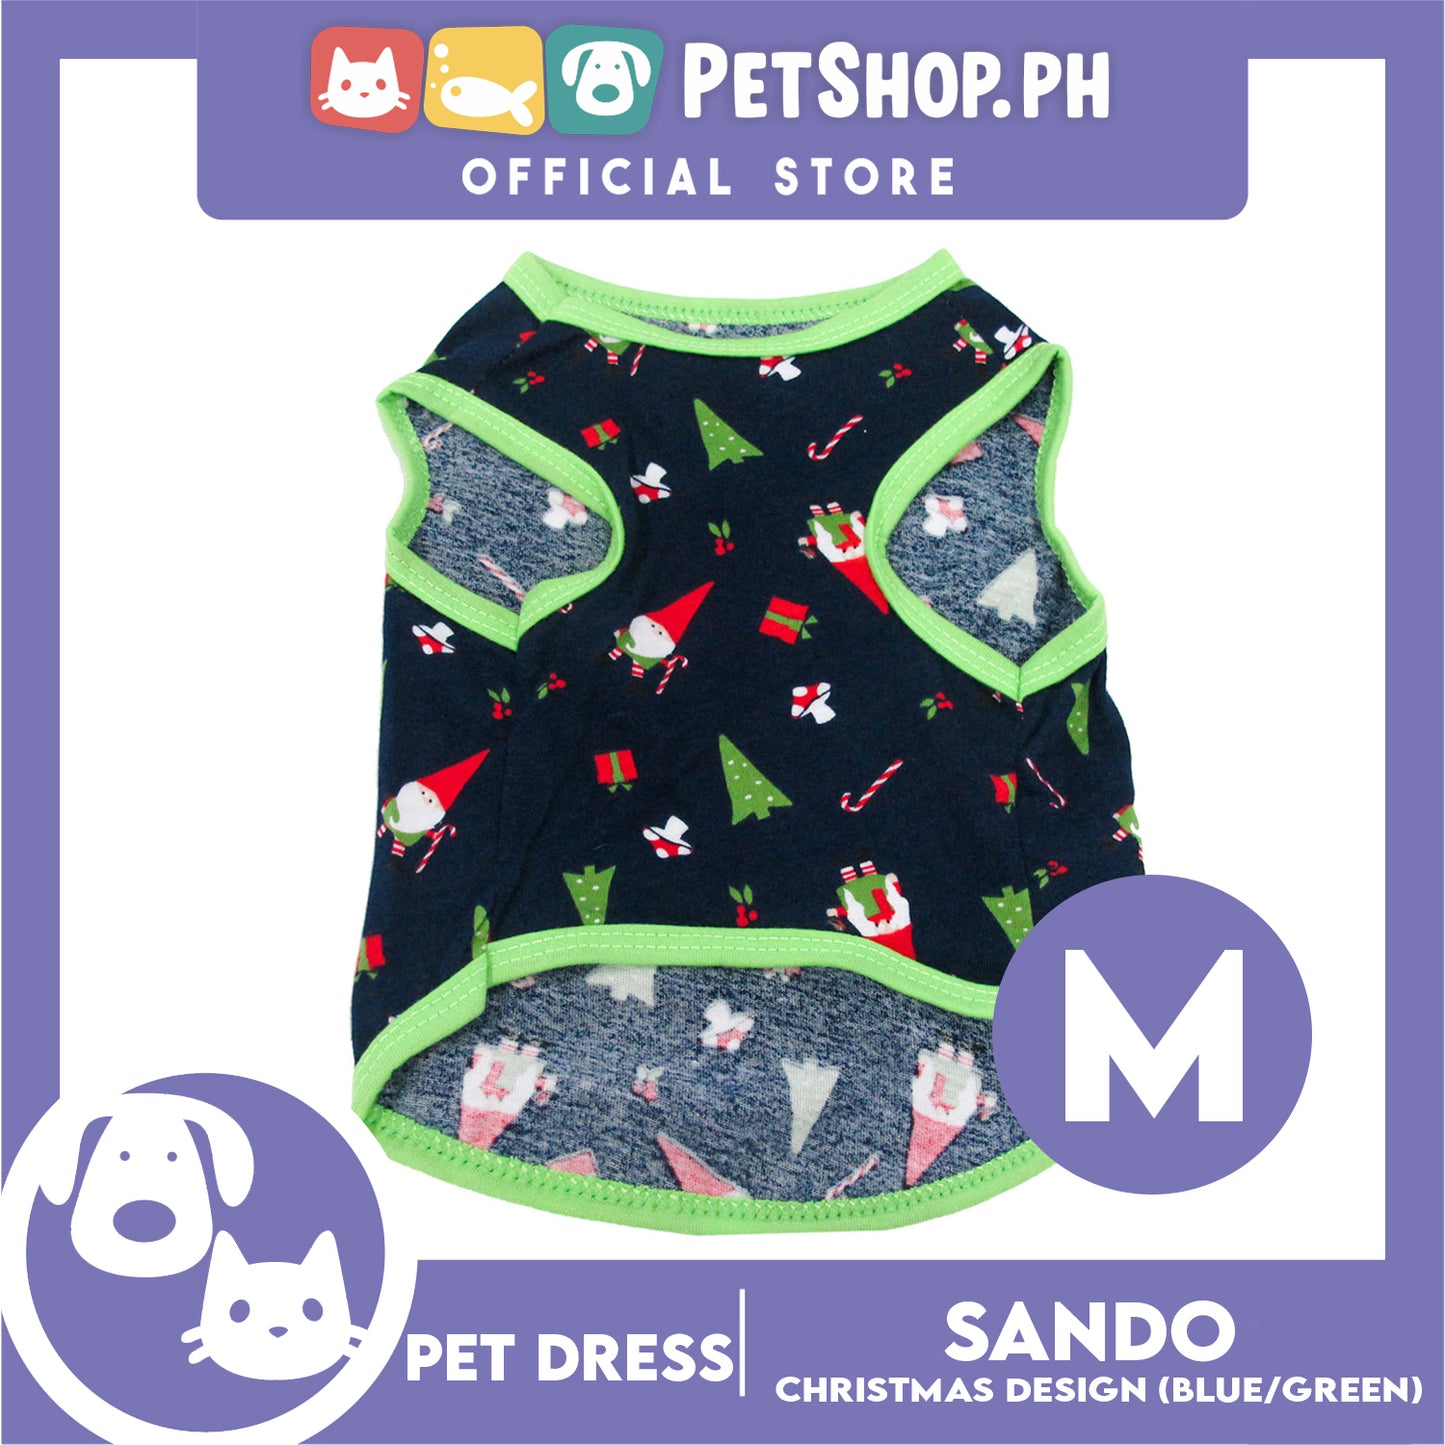 Pet Shirt Christmas Design with Green Piping Sleeveless (Medium) for Puppy, Small Dog & Cats- Sando Breathable Clothes, Pet T-shirt, Sweatshirt